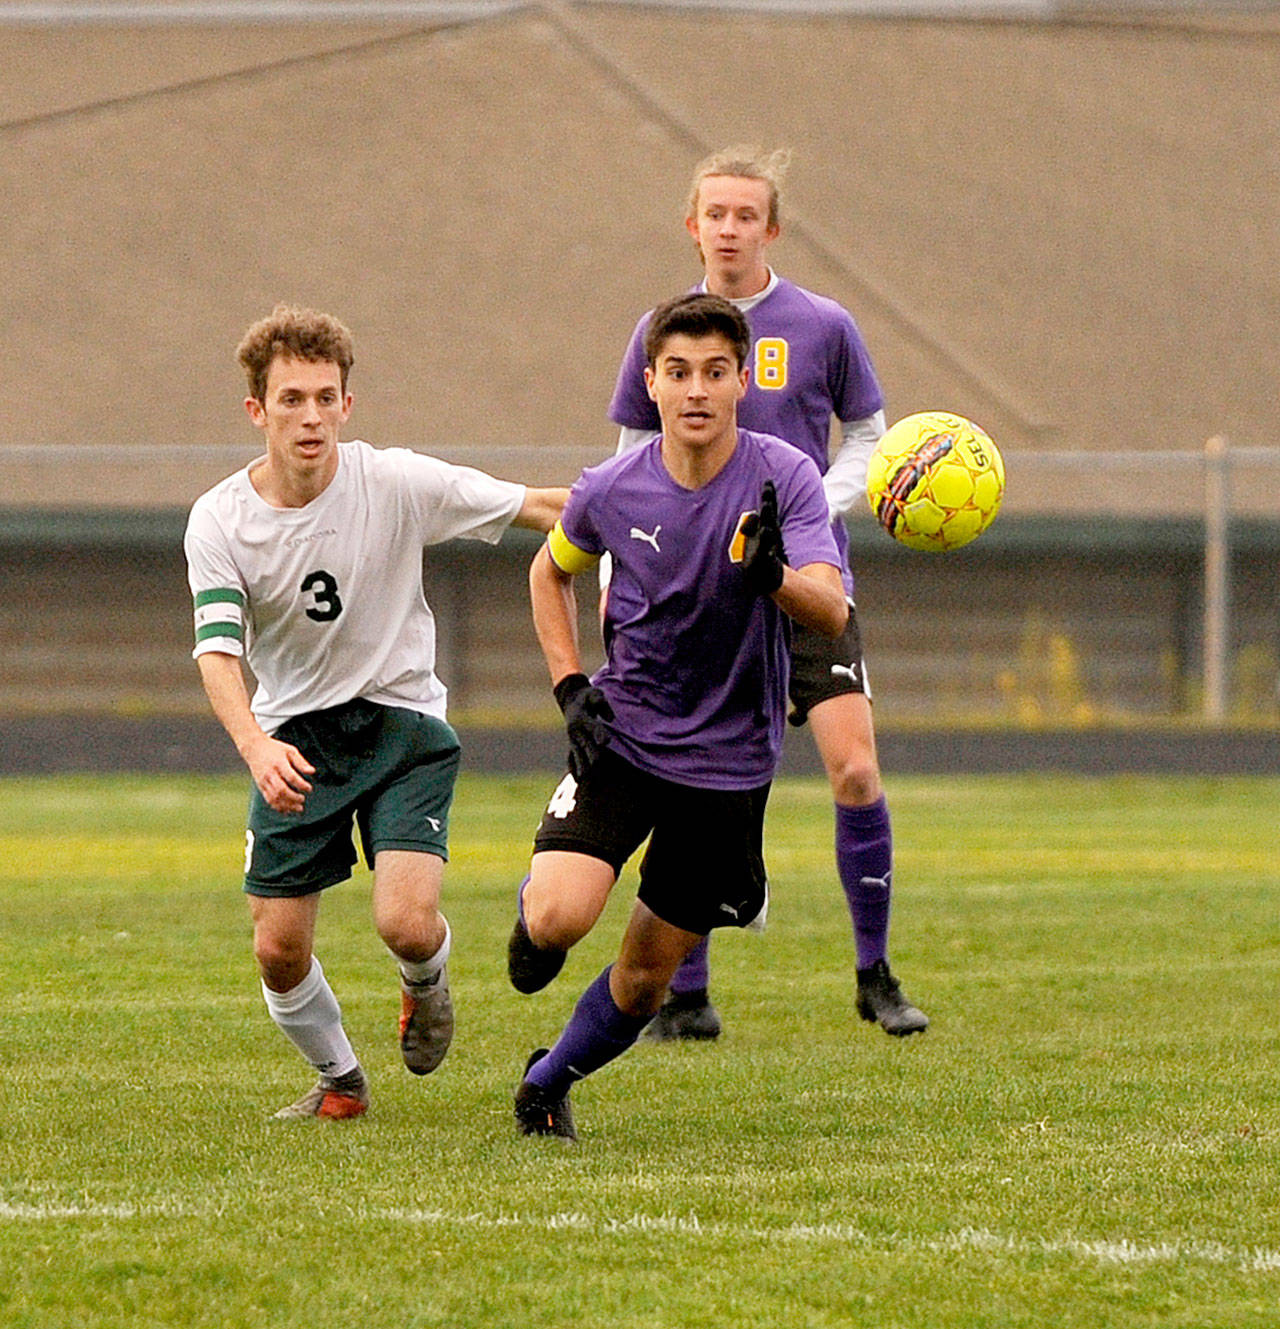 Port Angeles’ Andrew St. George, left, and Sequim’s Sean Weber battle for a loose ball while Weber’s teammate Michael McAleer is ready in the background Tuesday in Sequim. Sequim won the match 1-0 in what was a battle for first place in the Olympic League 2A Division. (Michael Dashiell/Olympic Peninsula News Group)